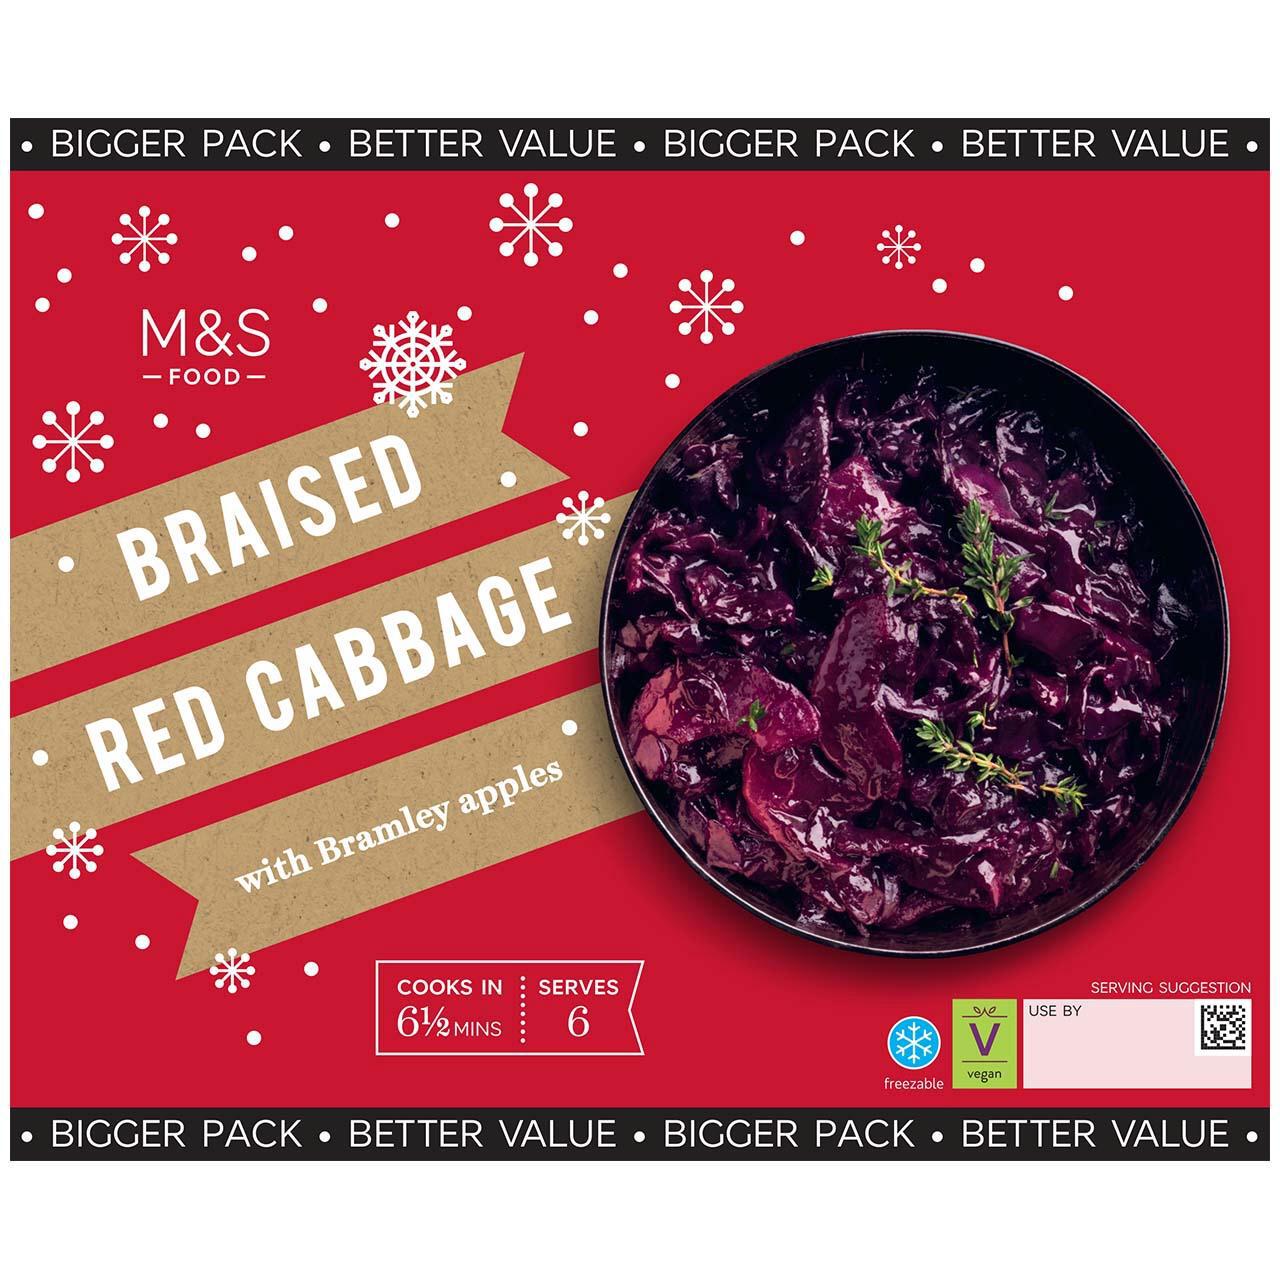 M&S Red Cabbage 600g